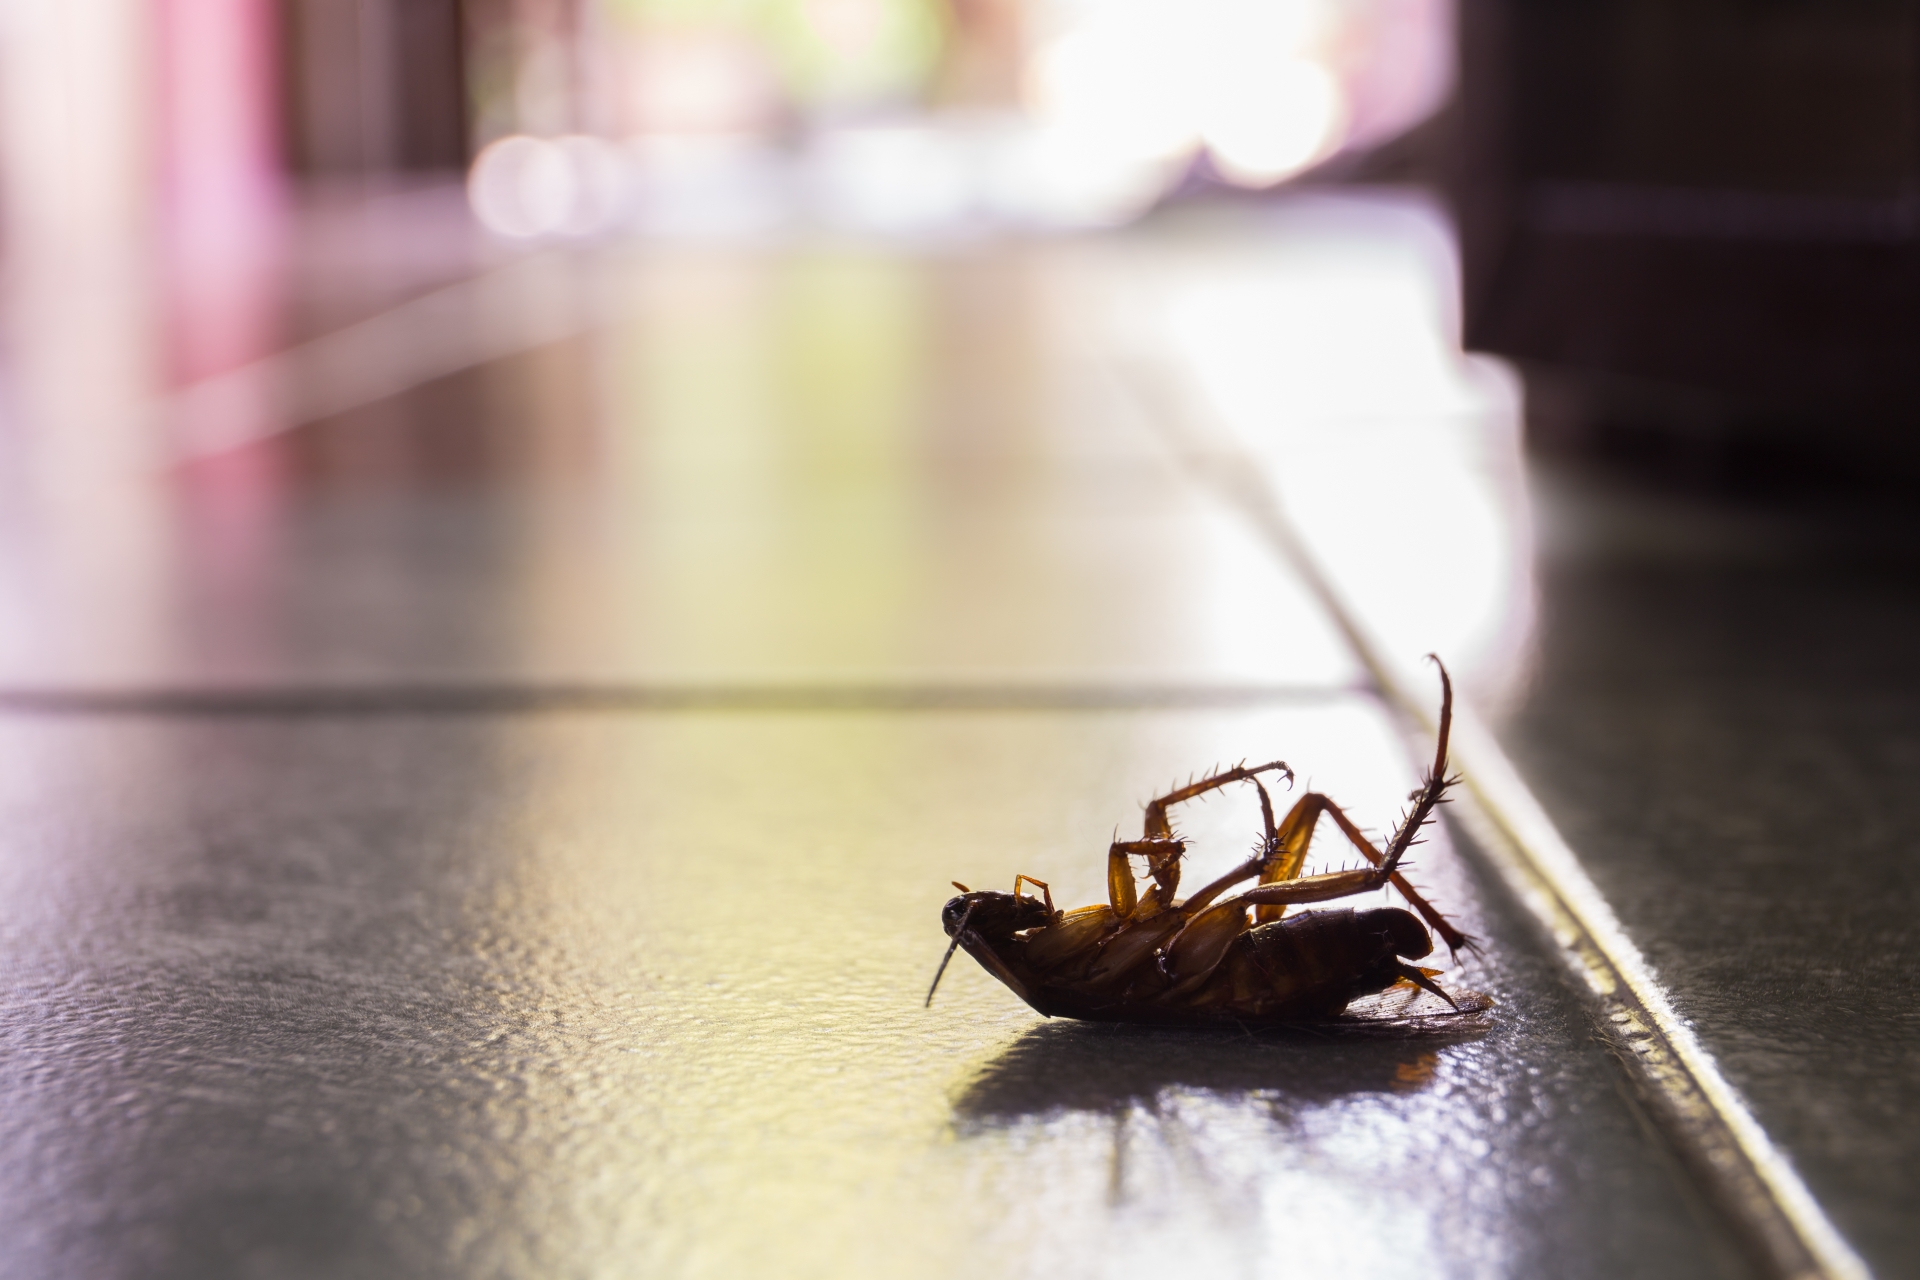 Cockroach Control, Pest Control in East Dulwich, SE22. Call Now 020 8166 9746